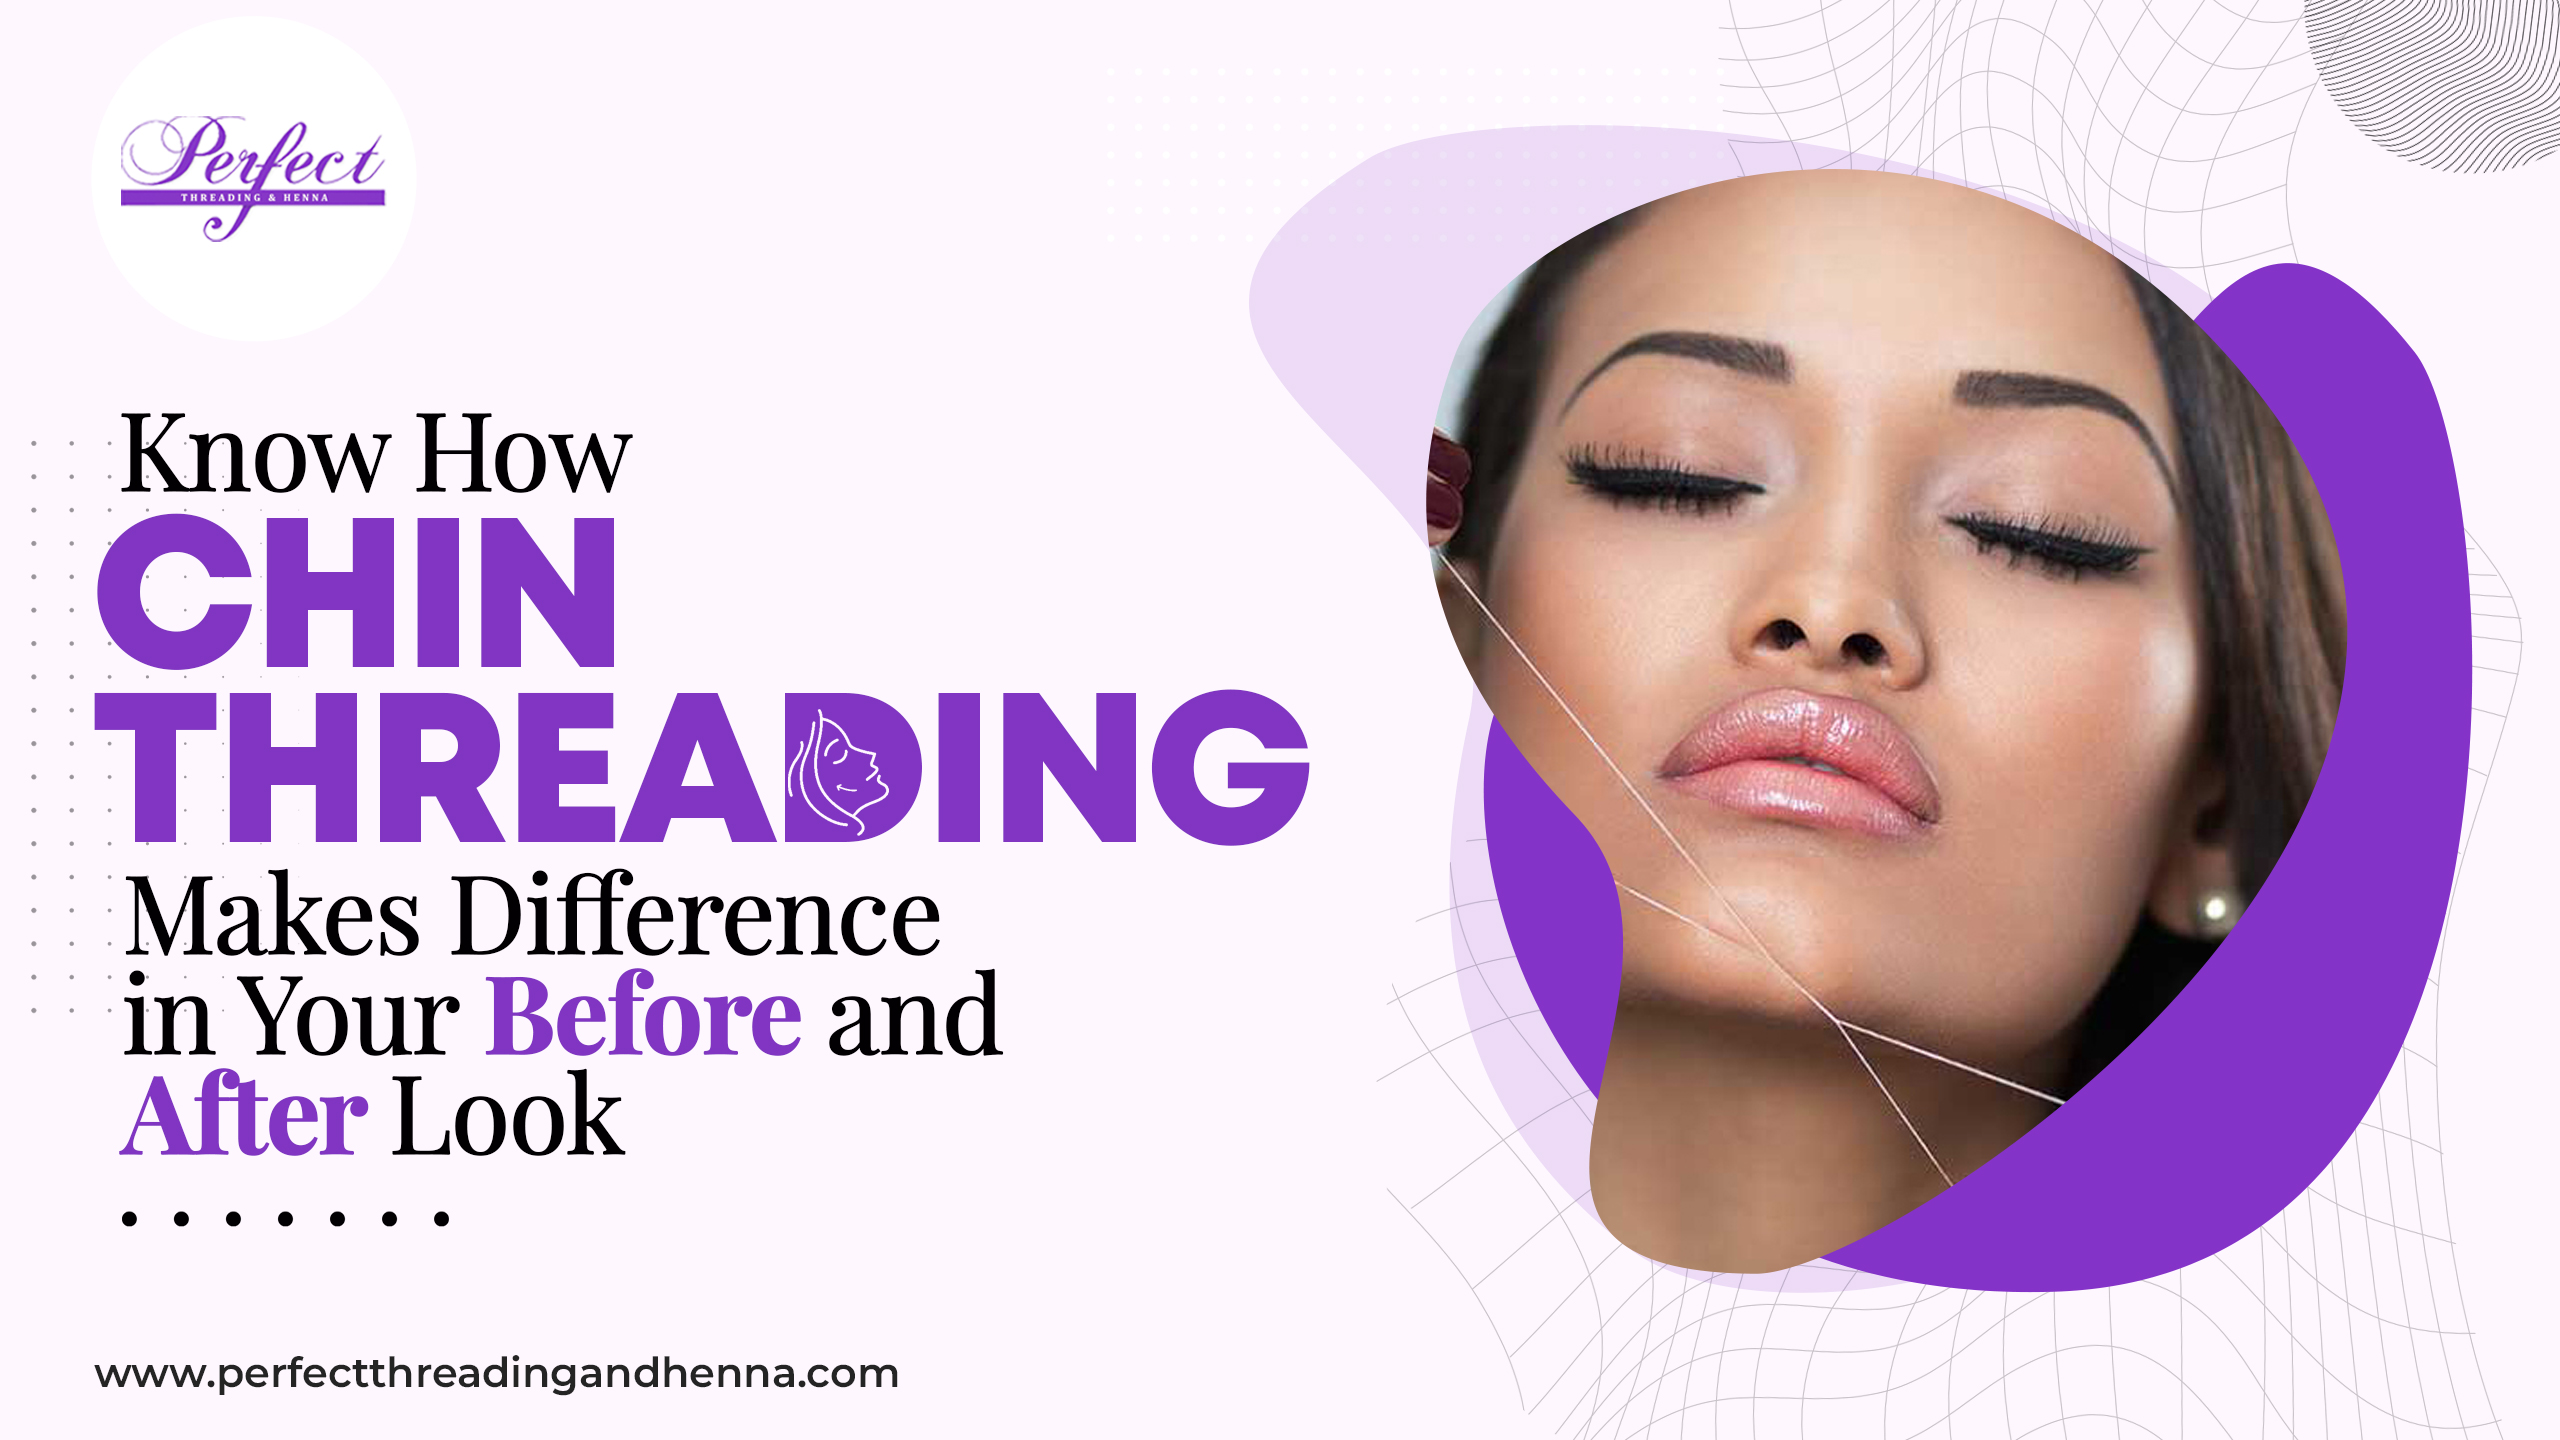 Know How Chin Threading Makes Difference in Your Before and After Look